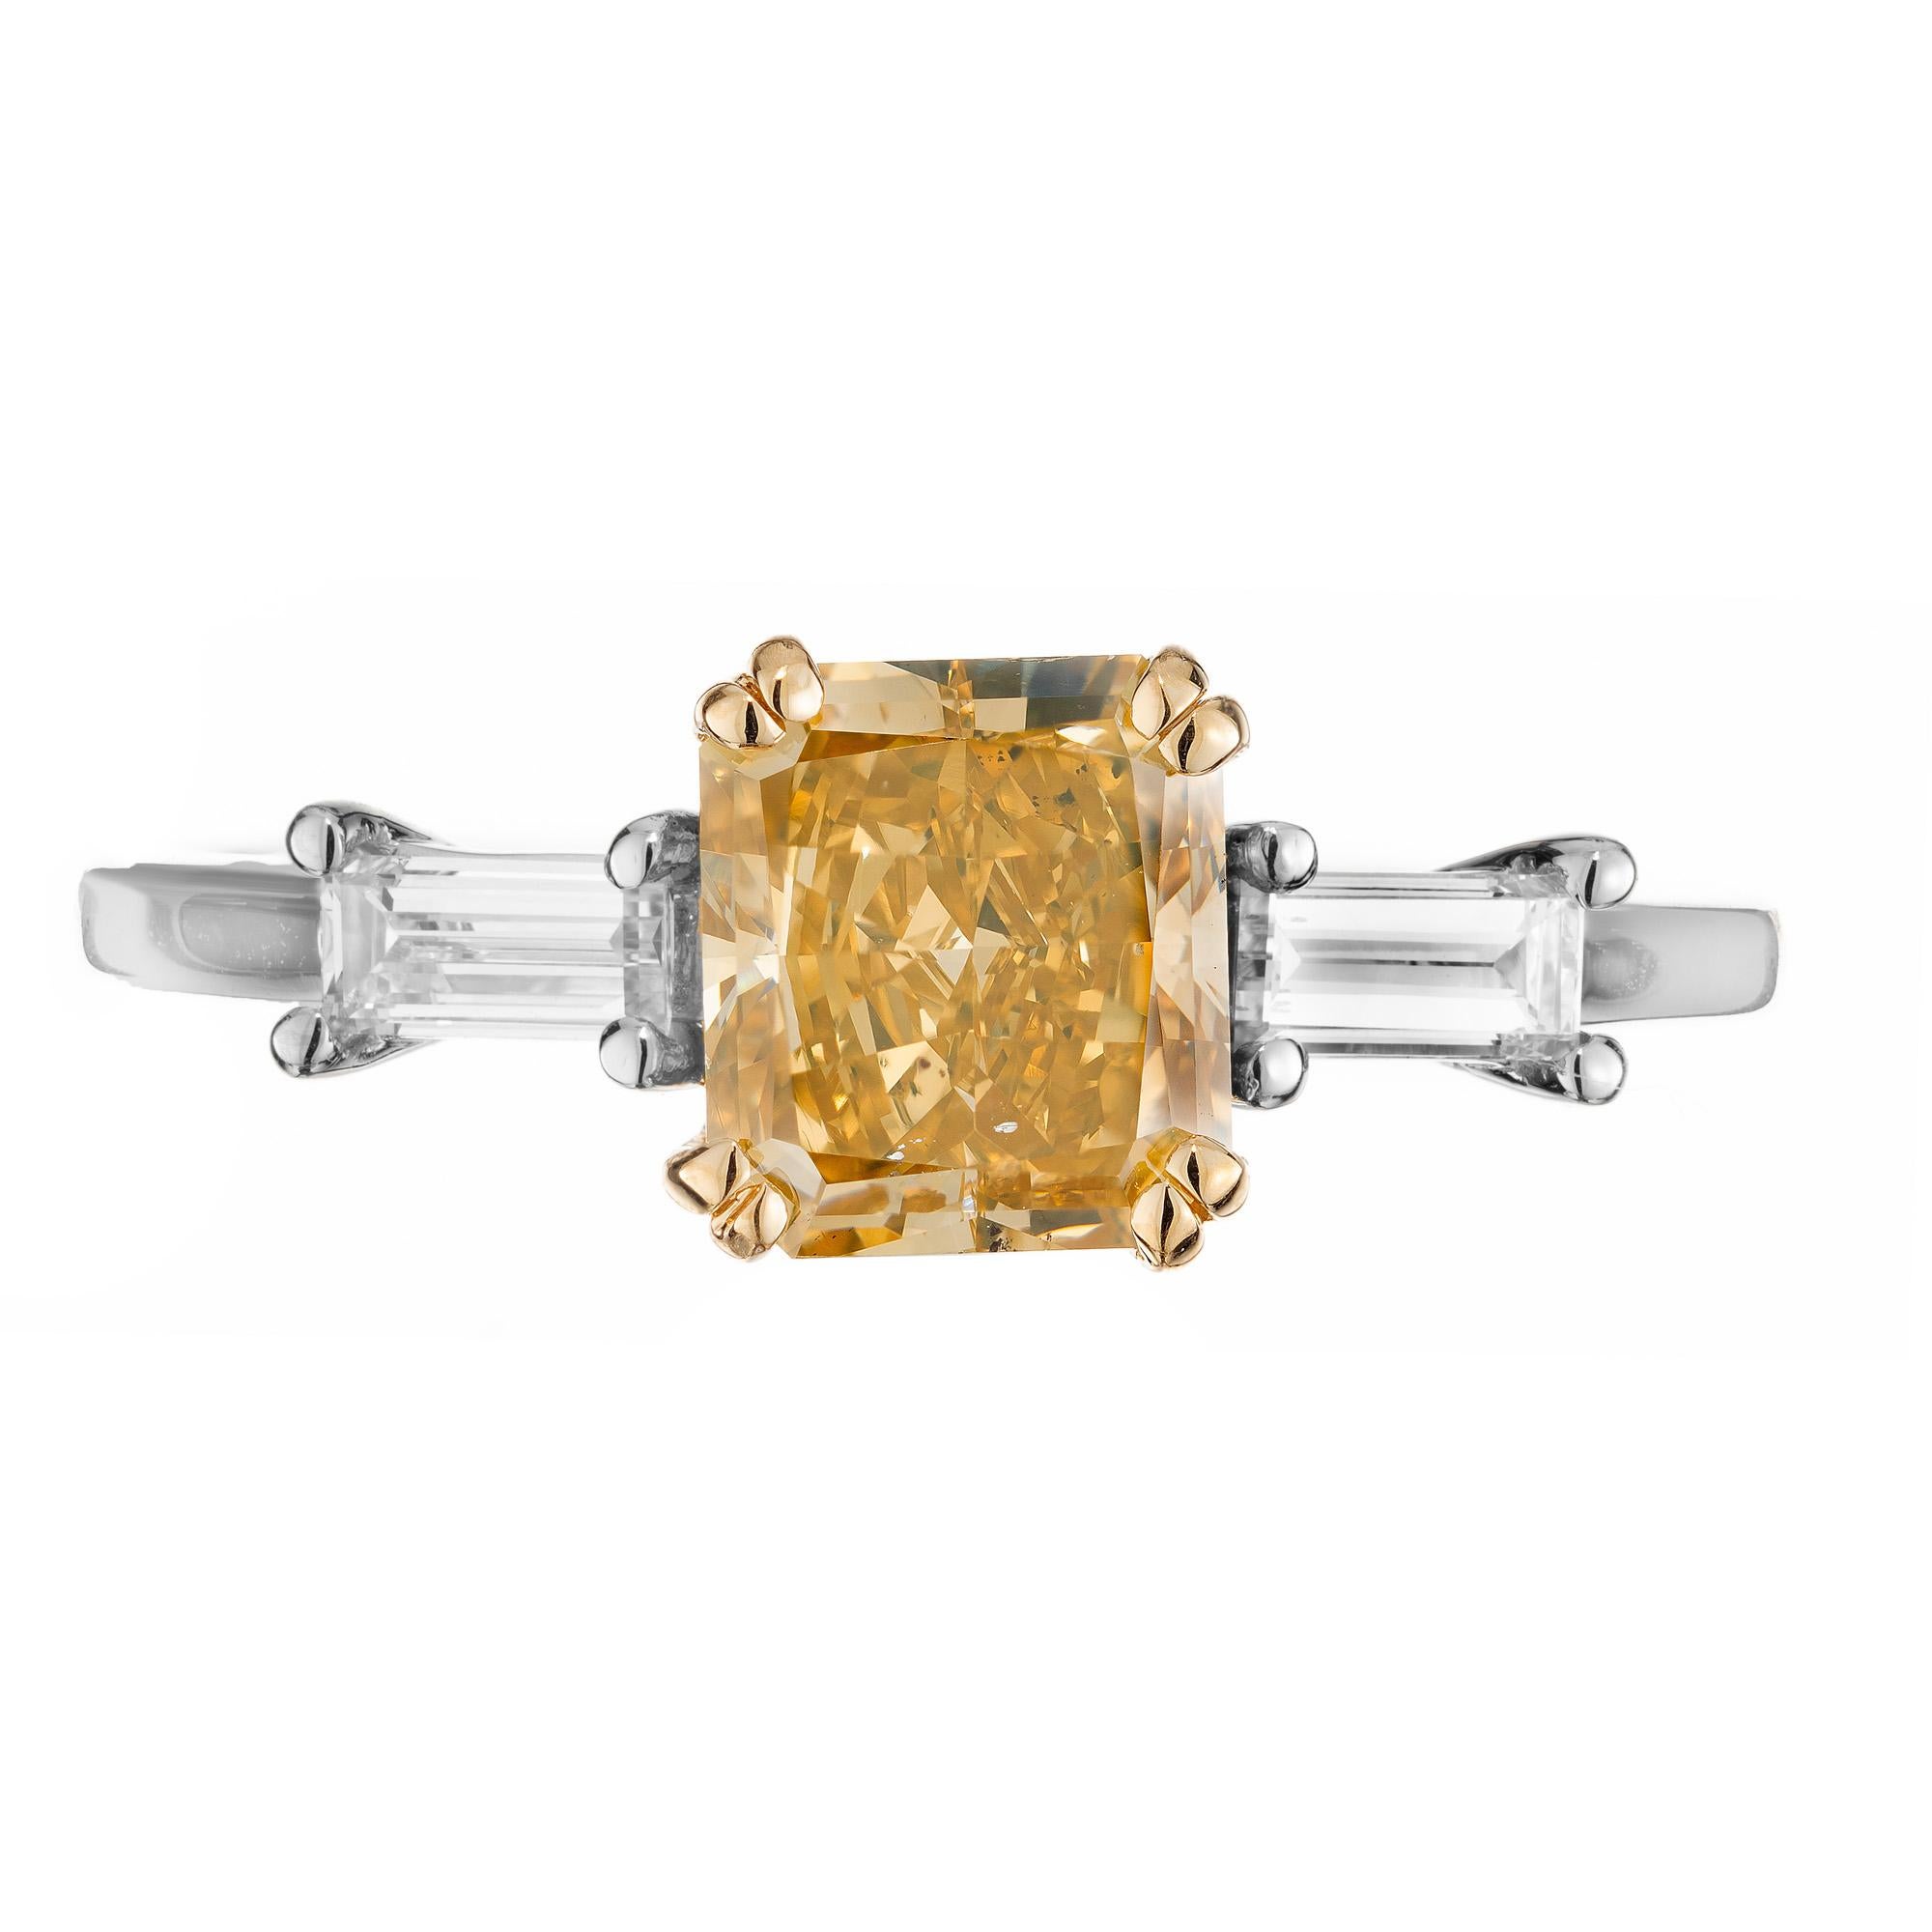 Gorgeous 1.42 carat natural GIA certified radiant cornered cut diamond engagement ring. At the center of this three-stone setting is a brownish yellow rectangular cut 1.42ct diamond. Beautifully accented by 2 straight cut baguette diamonds. Deep and